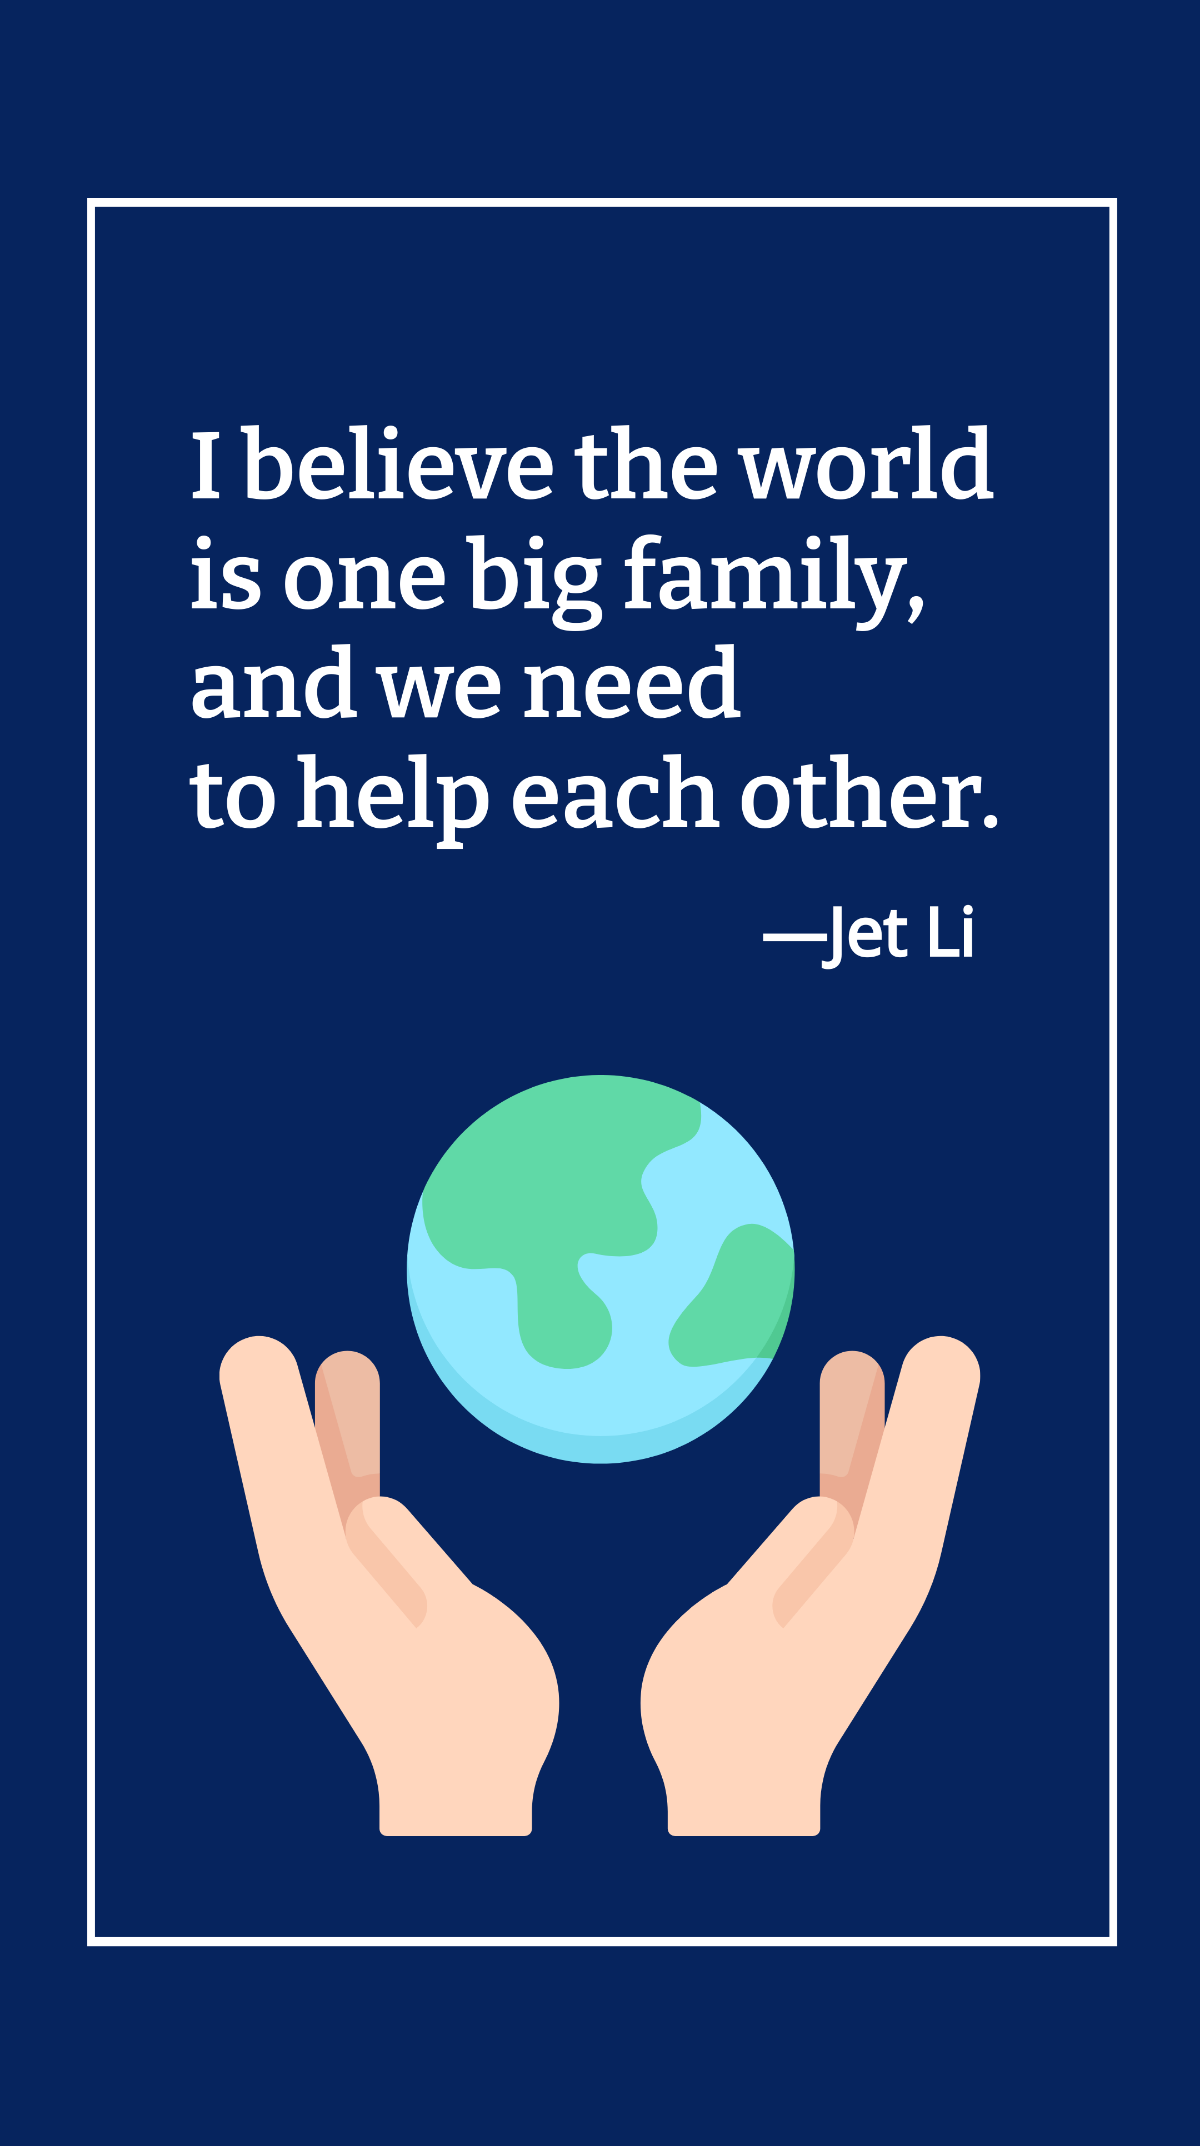 Jet Li - I believe the world is one big family, and we need to help each other.